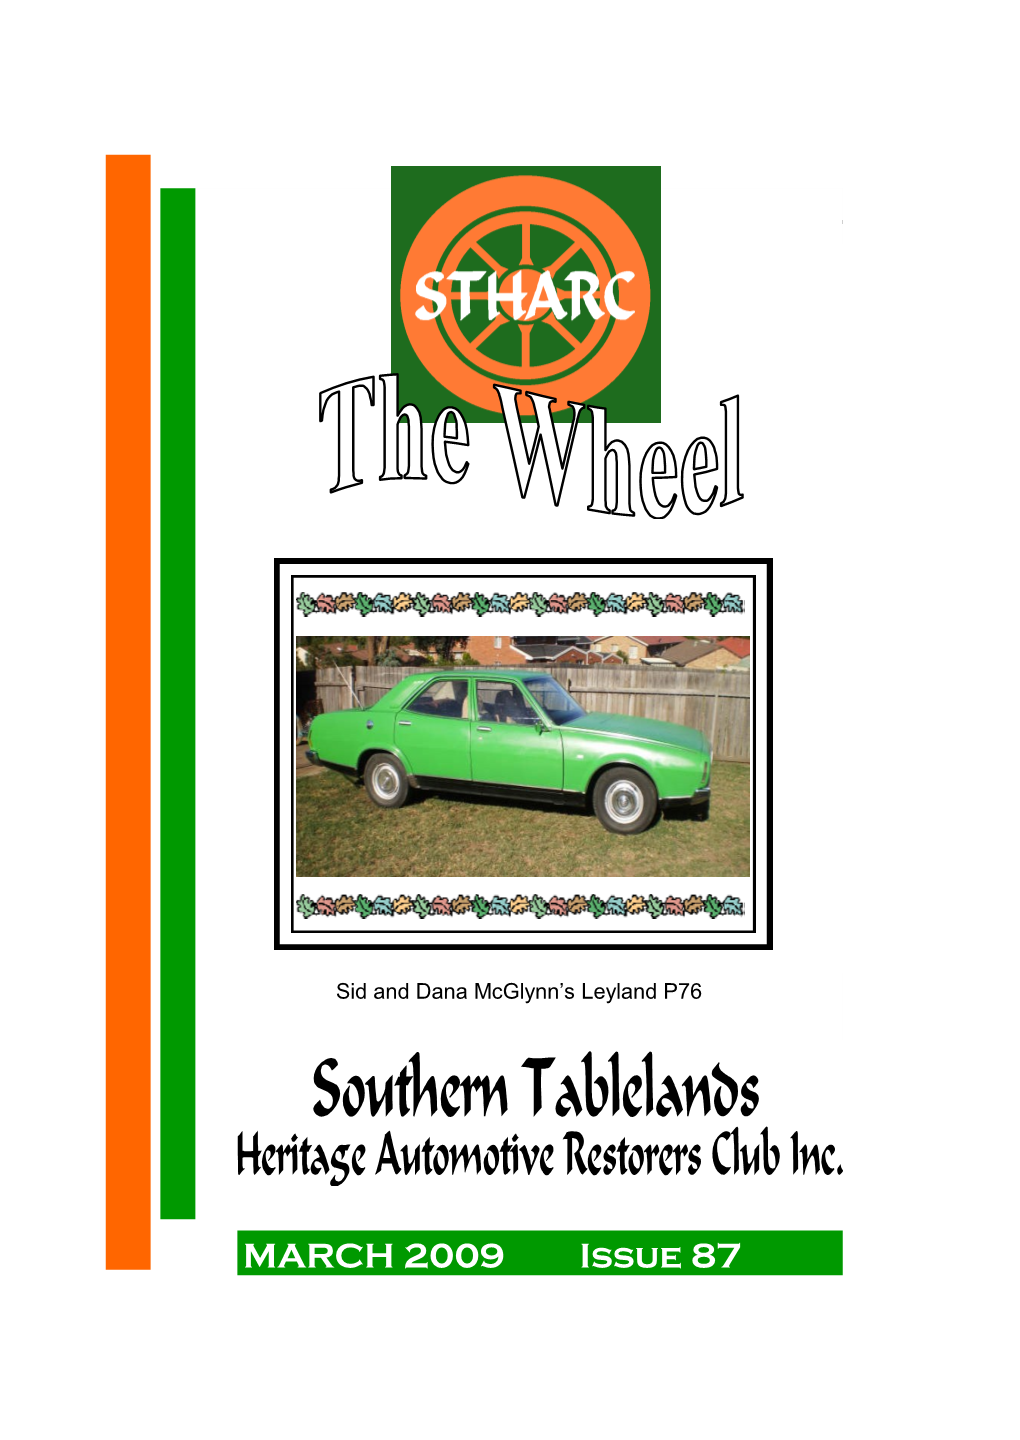 MARCH 2009 Issue 87 Page 2Southern Tablelands Heritage Automotive the Wheel Restorers Club